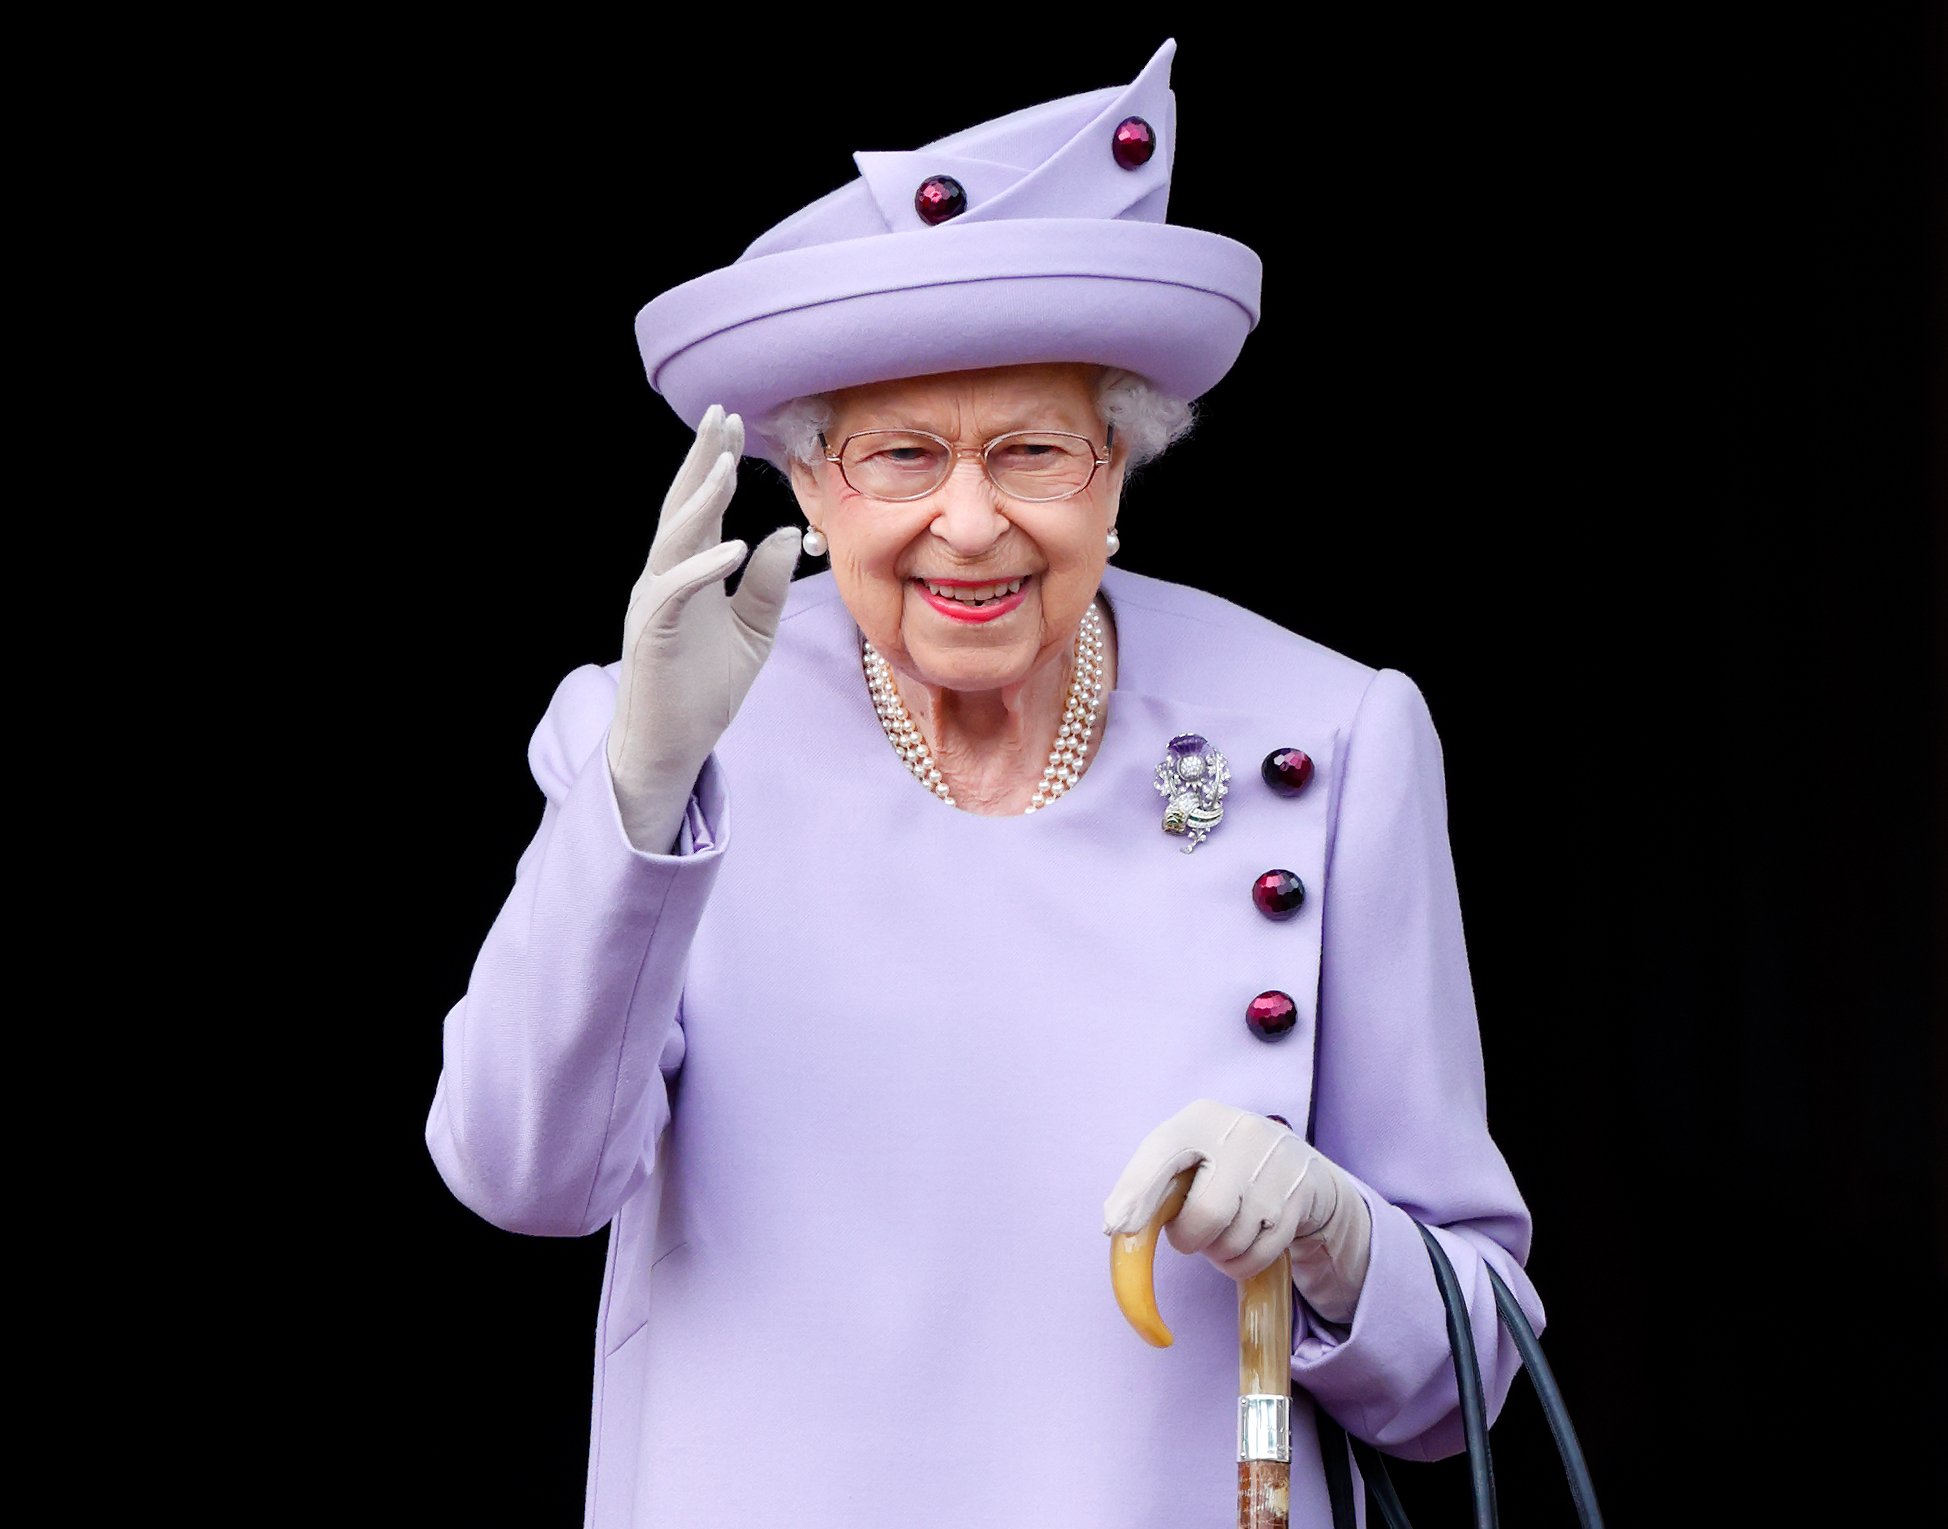 Queen Elizabeth II, who died at the age of TK on TK, waves wearing a purple outfit